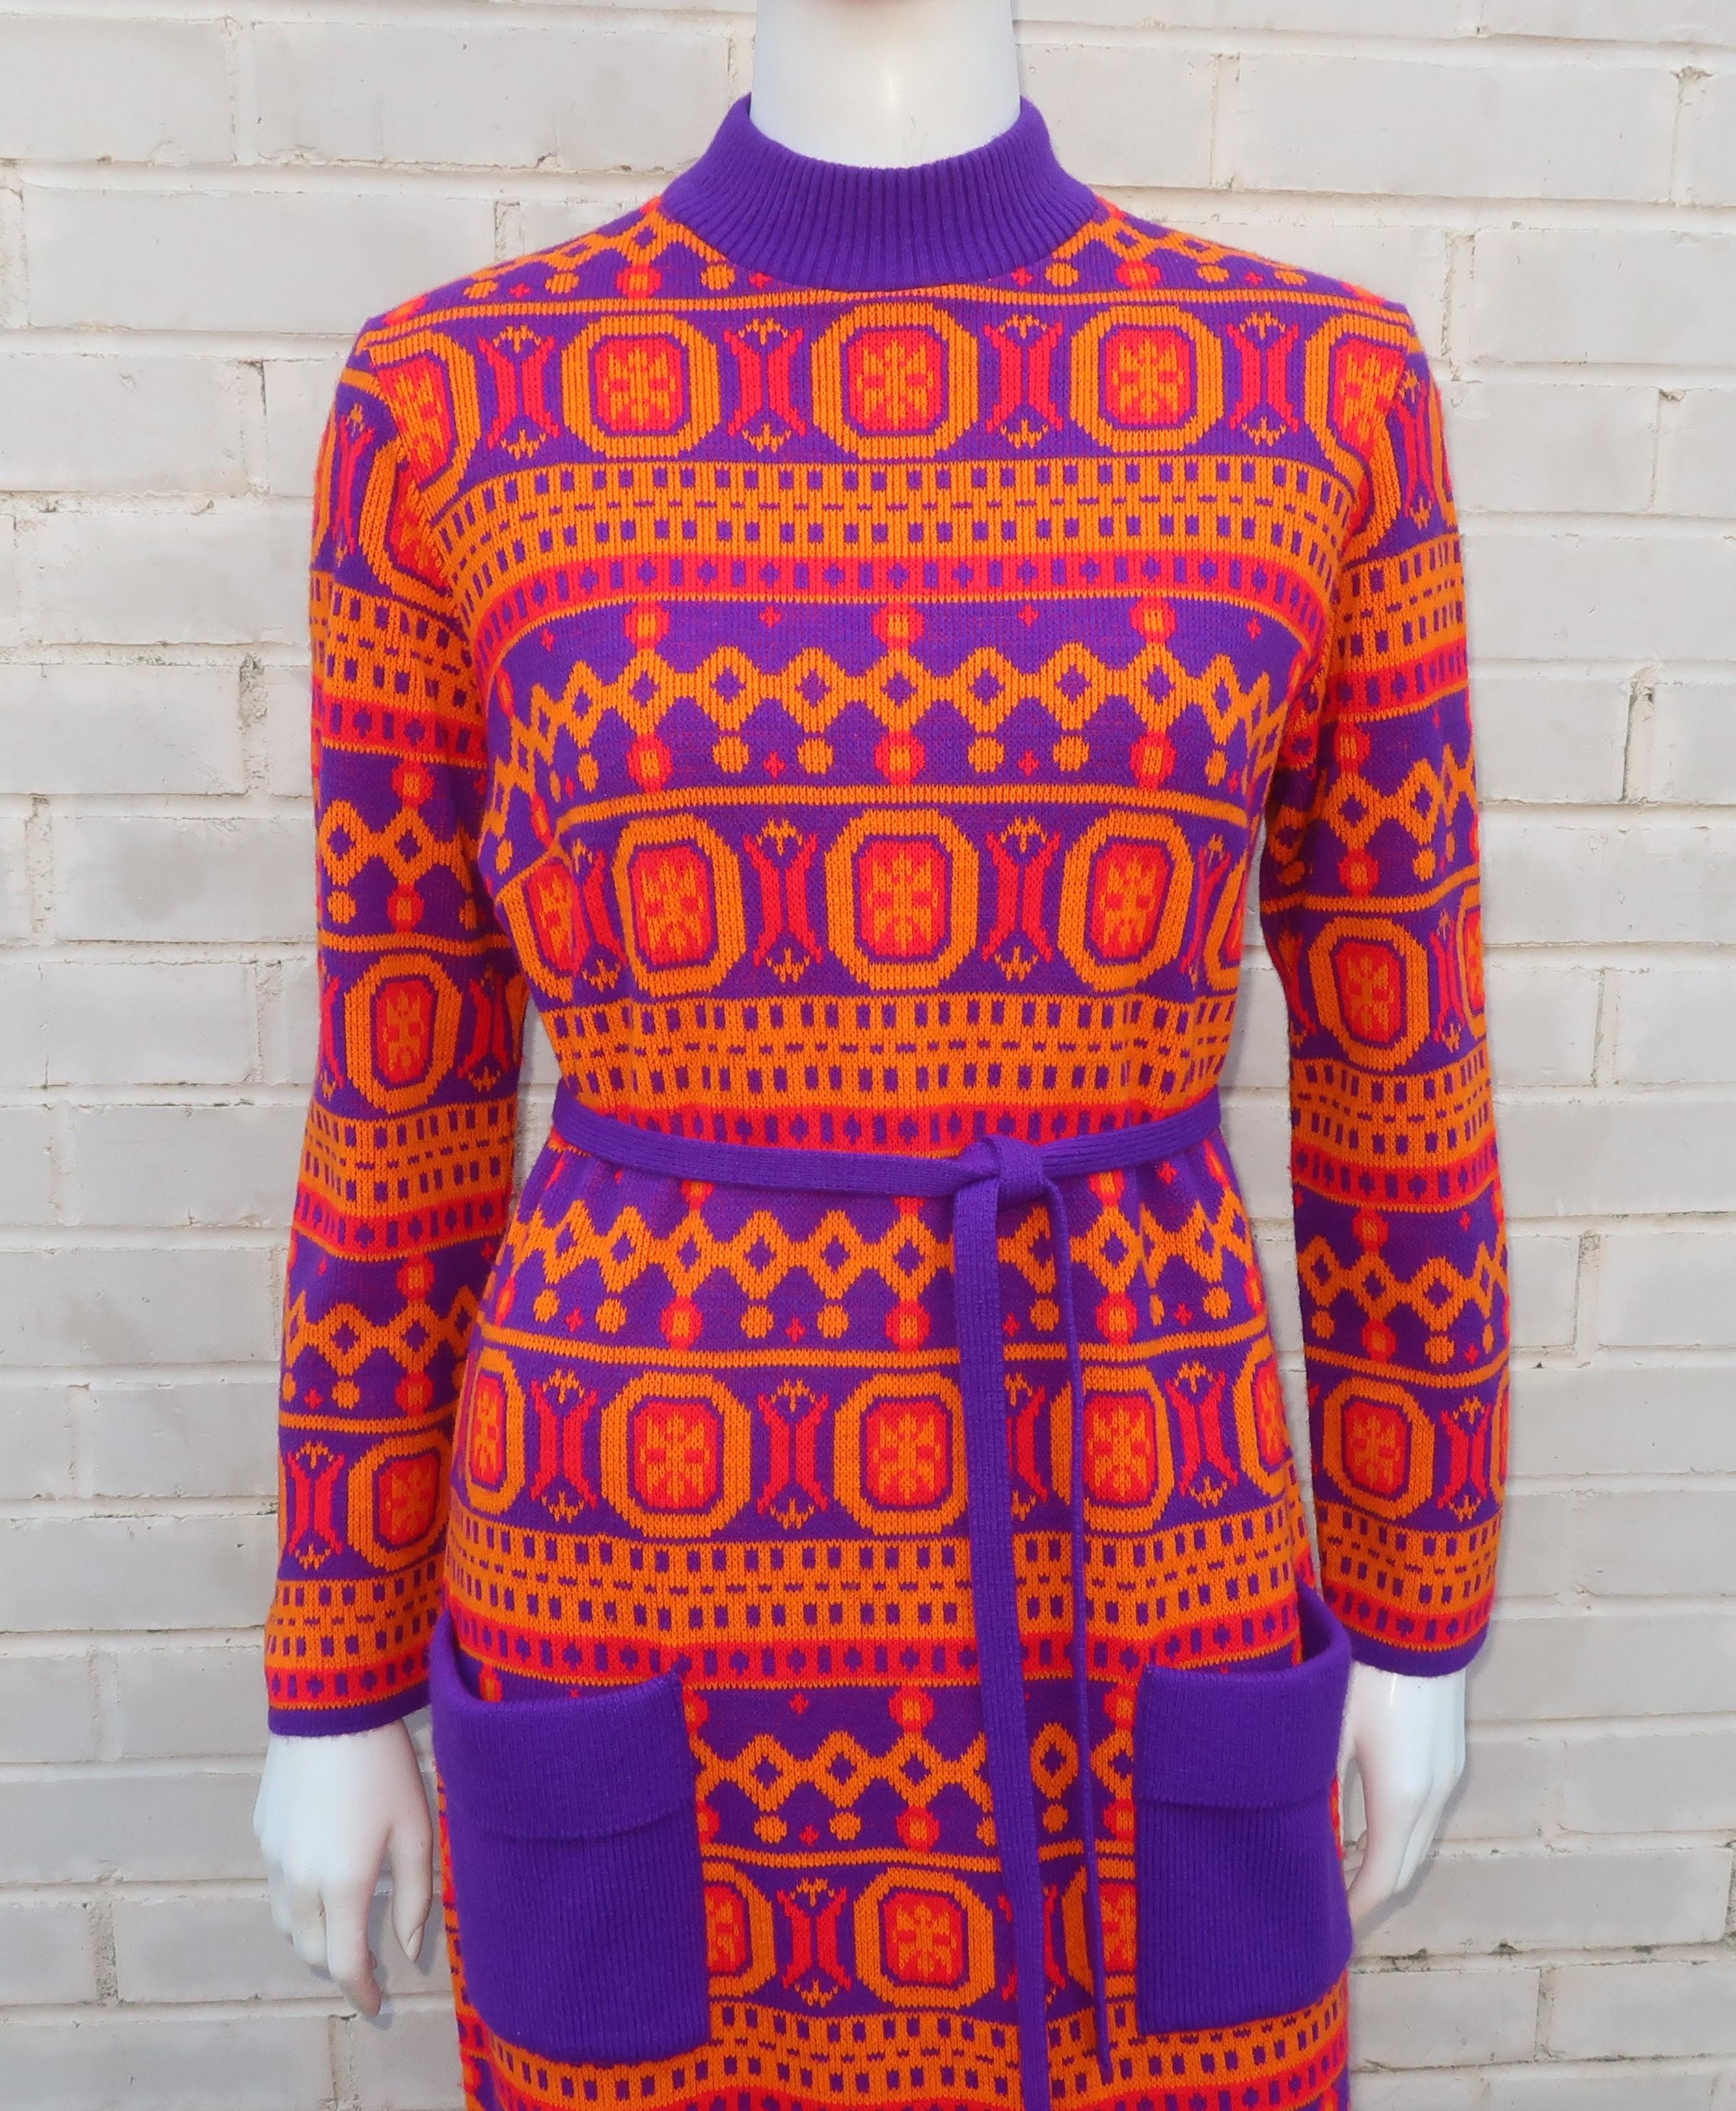 1970's Susan Small maxi sweater dress with a mod geometric motif in a vibrant color combination of red, orange and purple.  Susan Small was a British ready-to-wear clothing line opened in the 1940's with a reputation for party dress designs.  By the